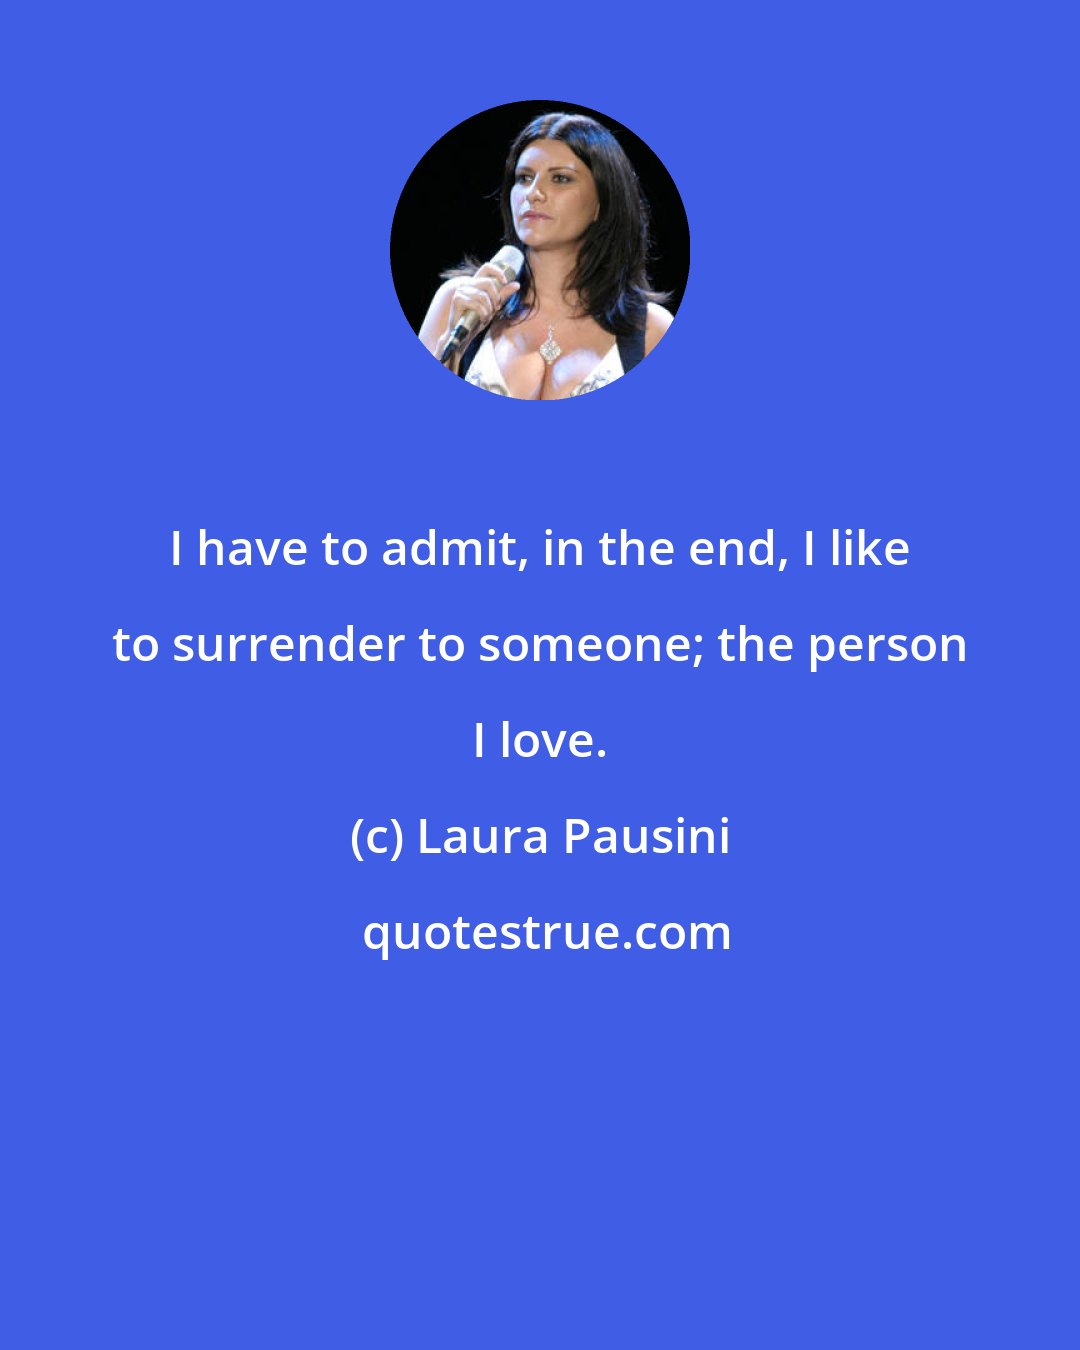 Laura Pausini: I have to admit, in the end, I like to surrender to someone; the person I love.